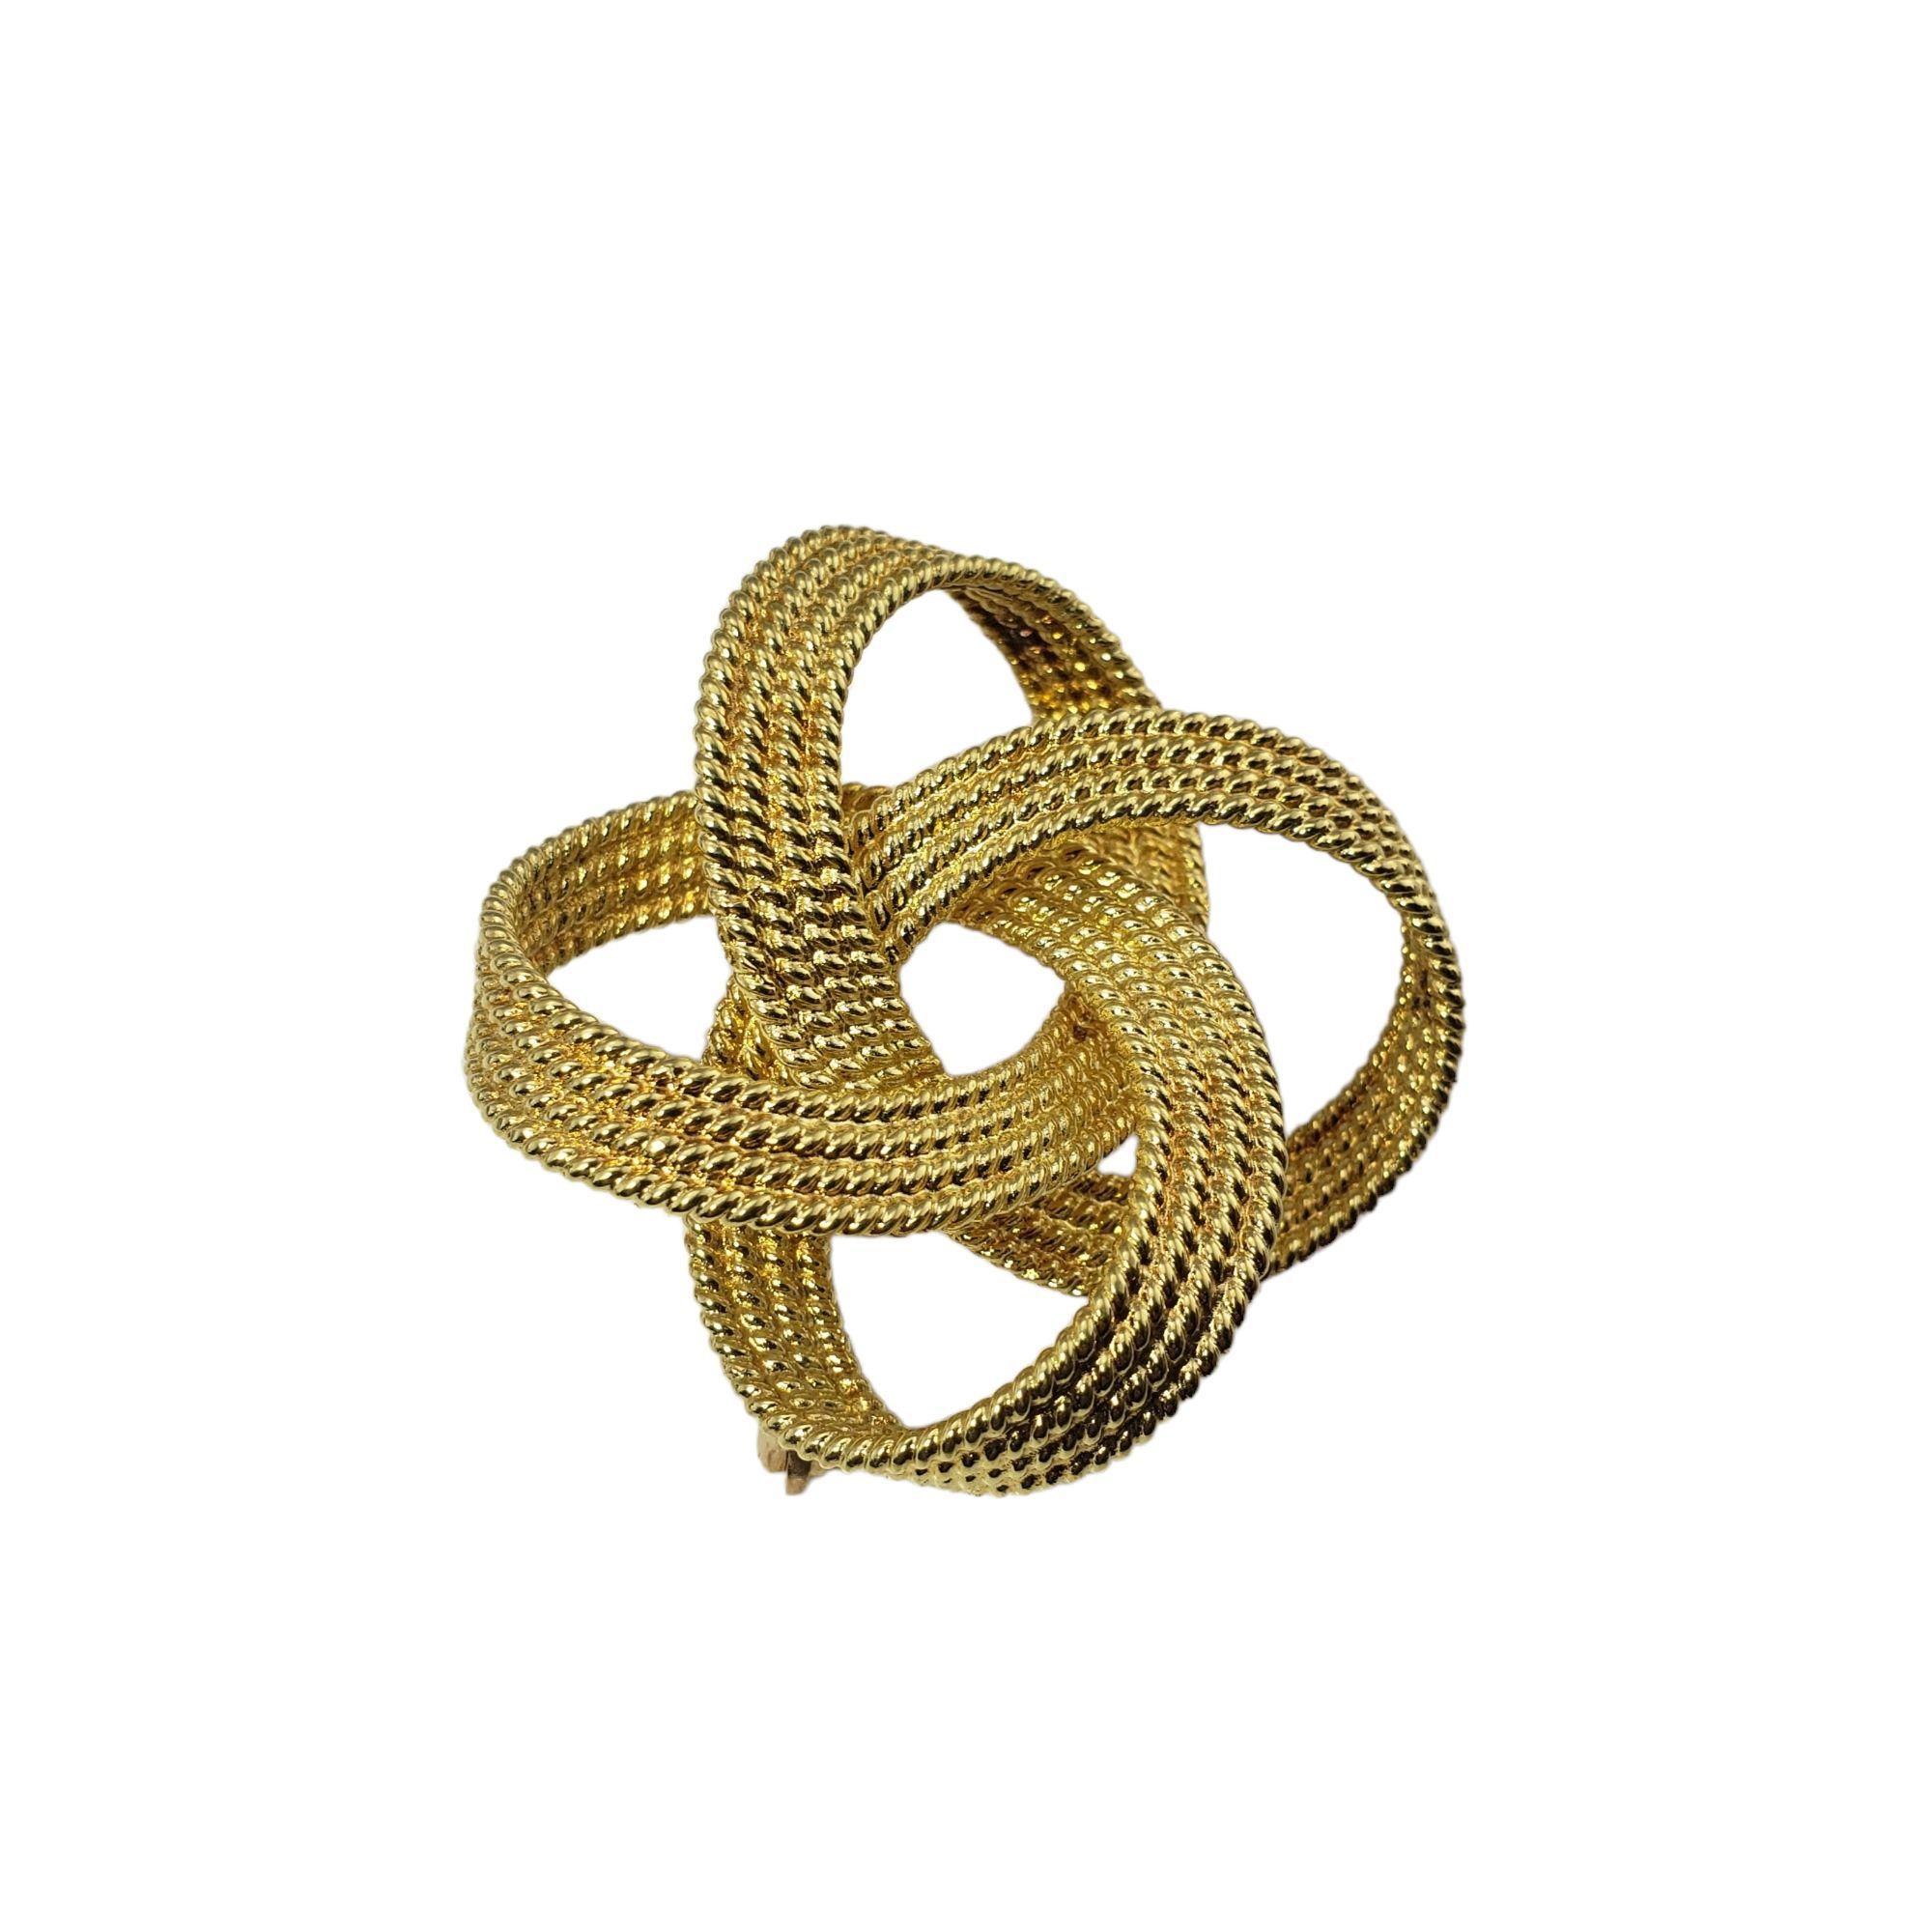 Tiffany & Co. 18 Karat Yellow Gold Knot Brooch / Pin In Good Condition For Sale In Washington Depot, CT